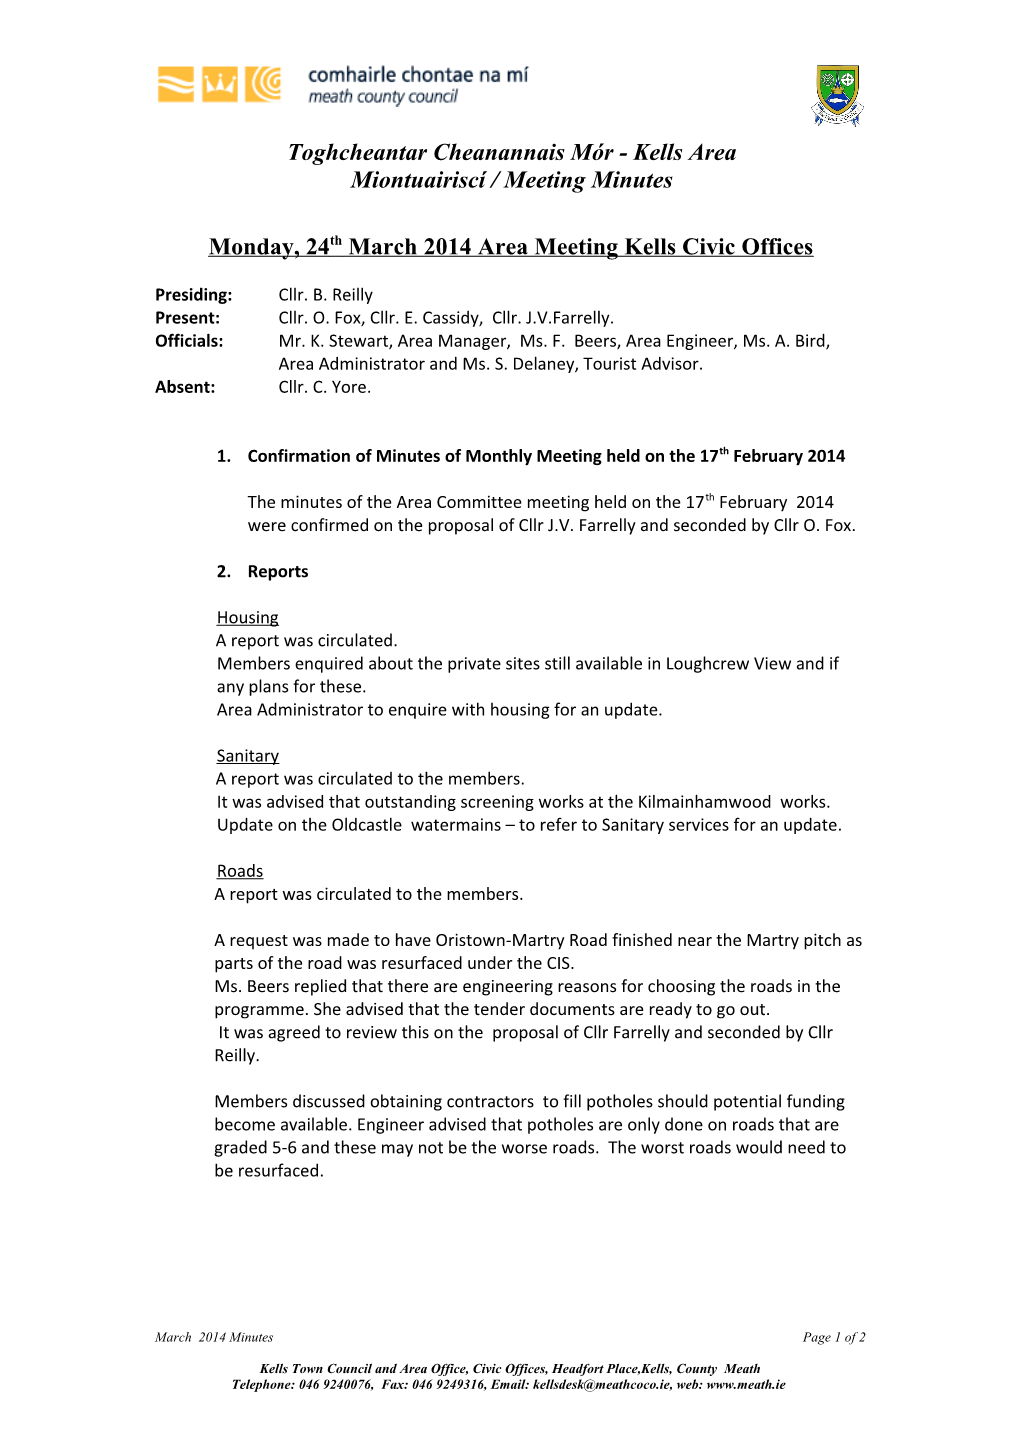 Monday, 24Thmarch 2014 Area Meeting Kells Civic Offices